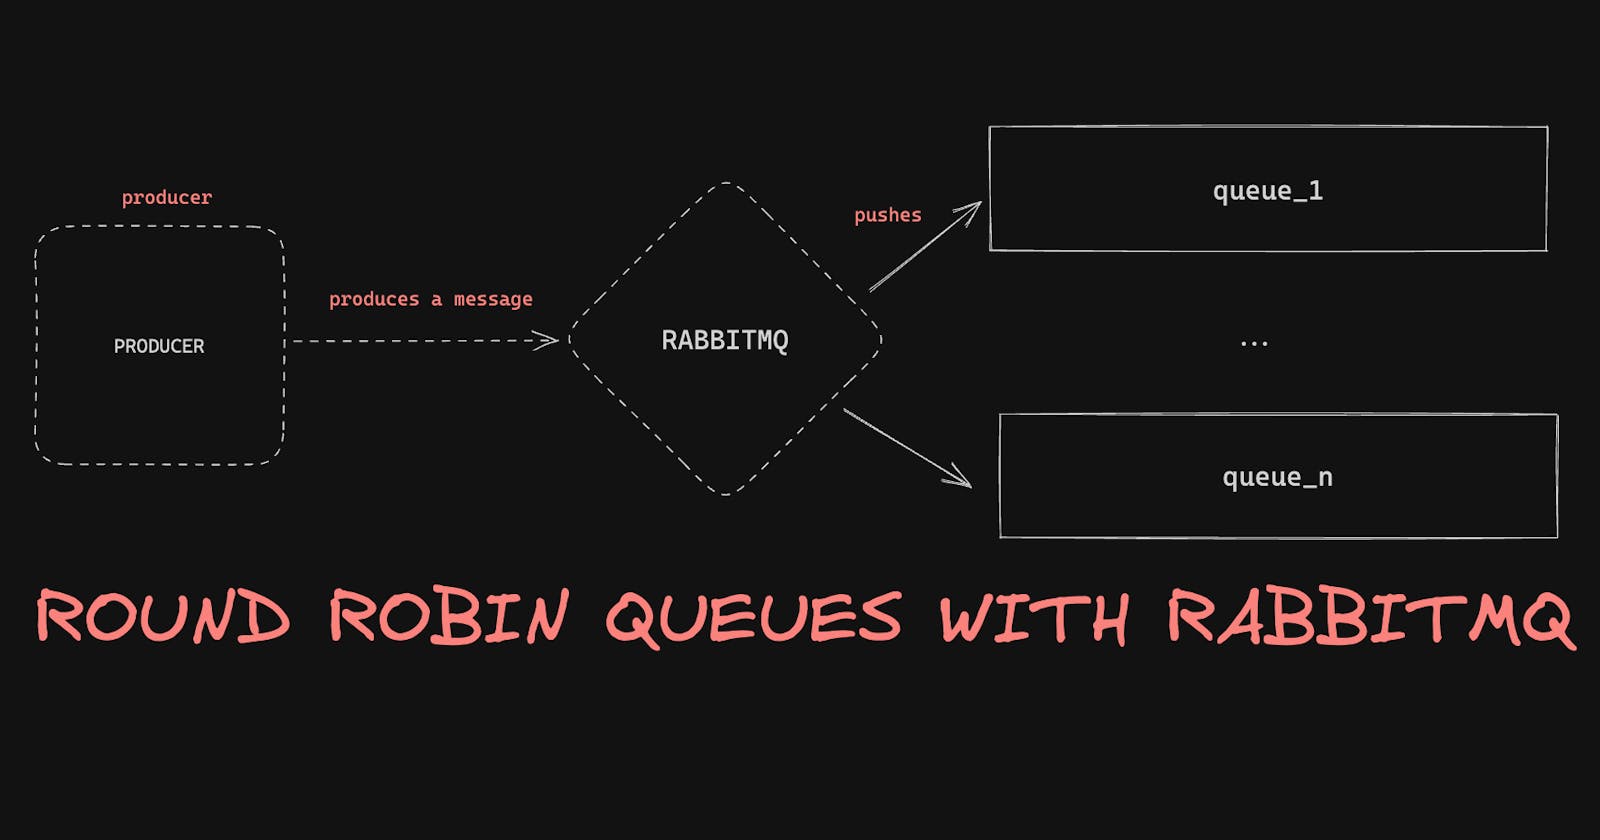 What about round-robin queues with RabbitMQ?